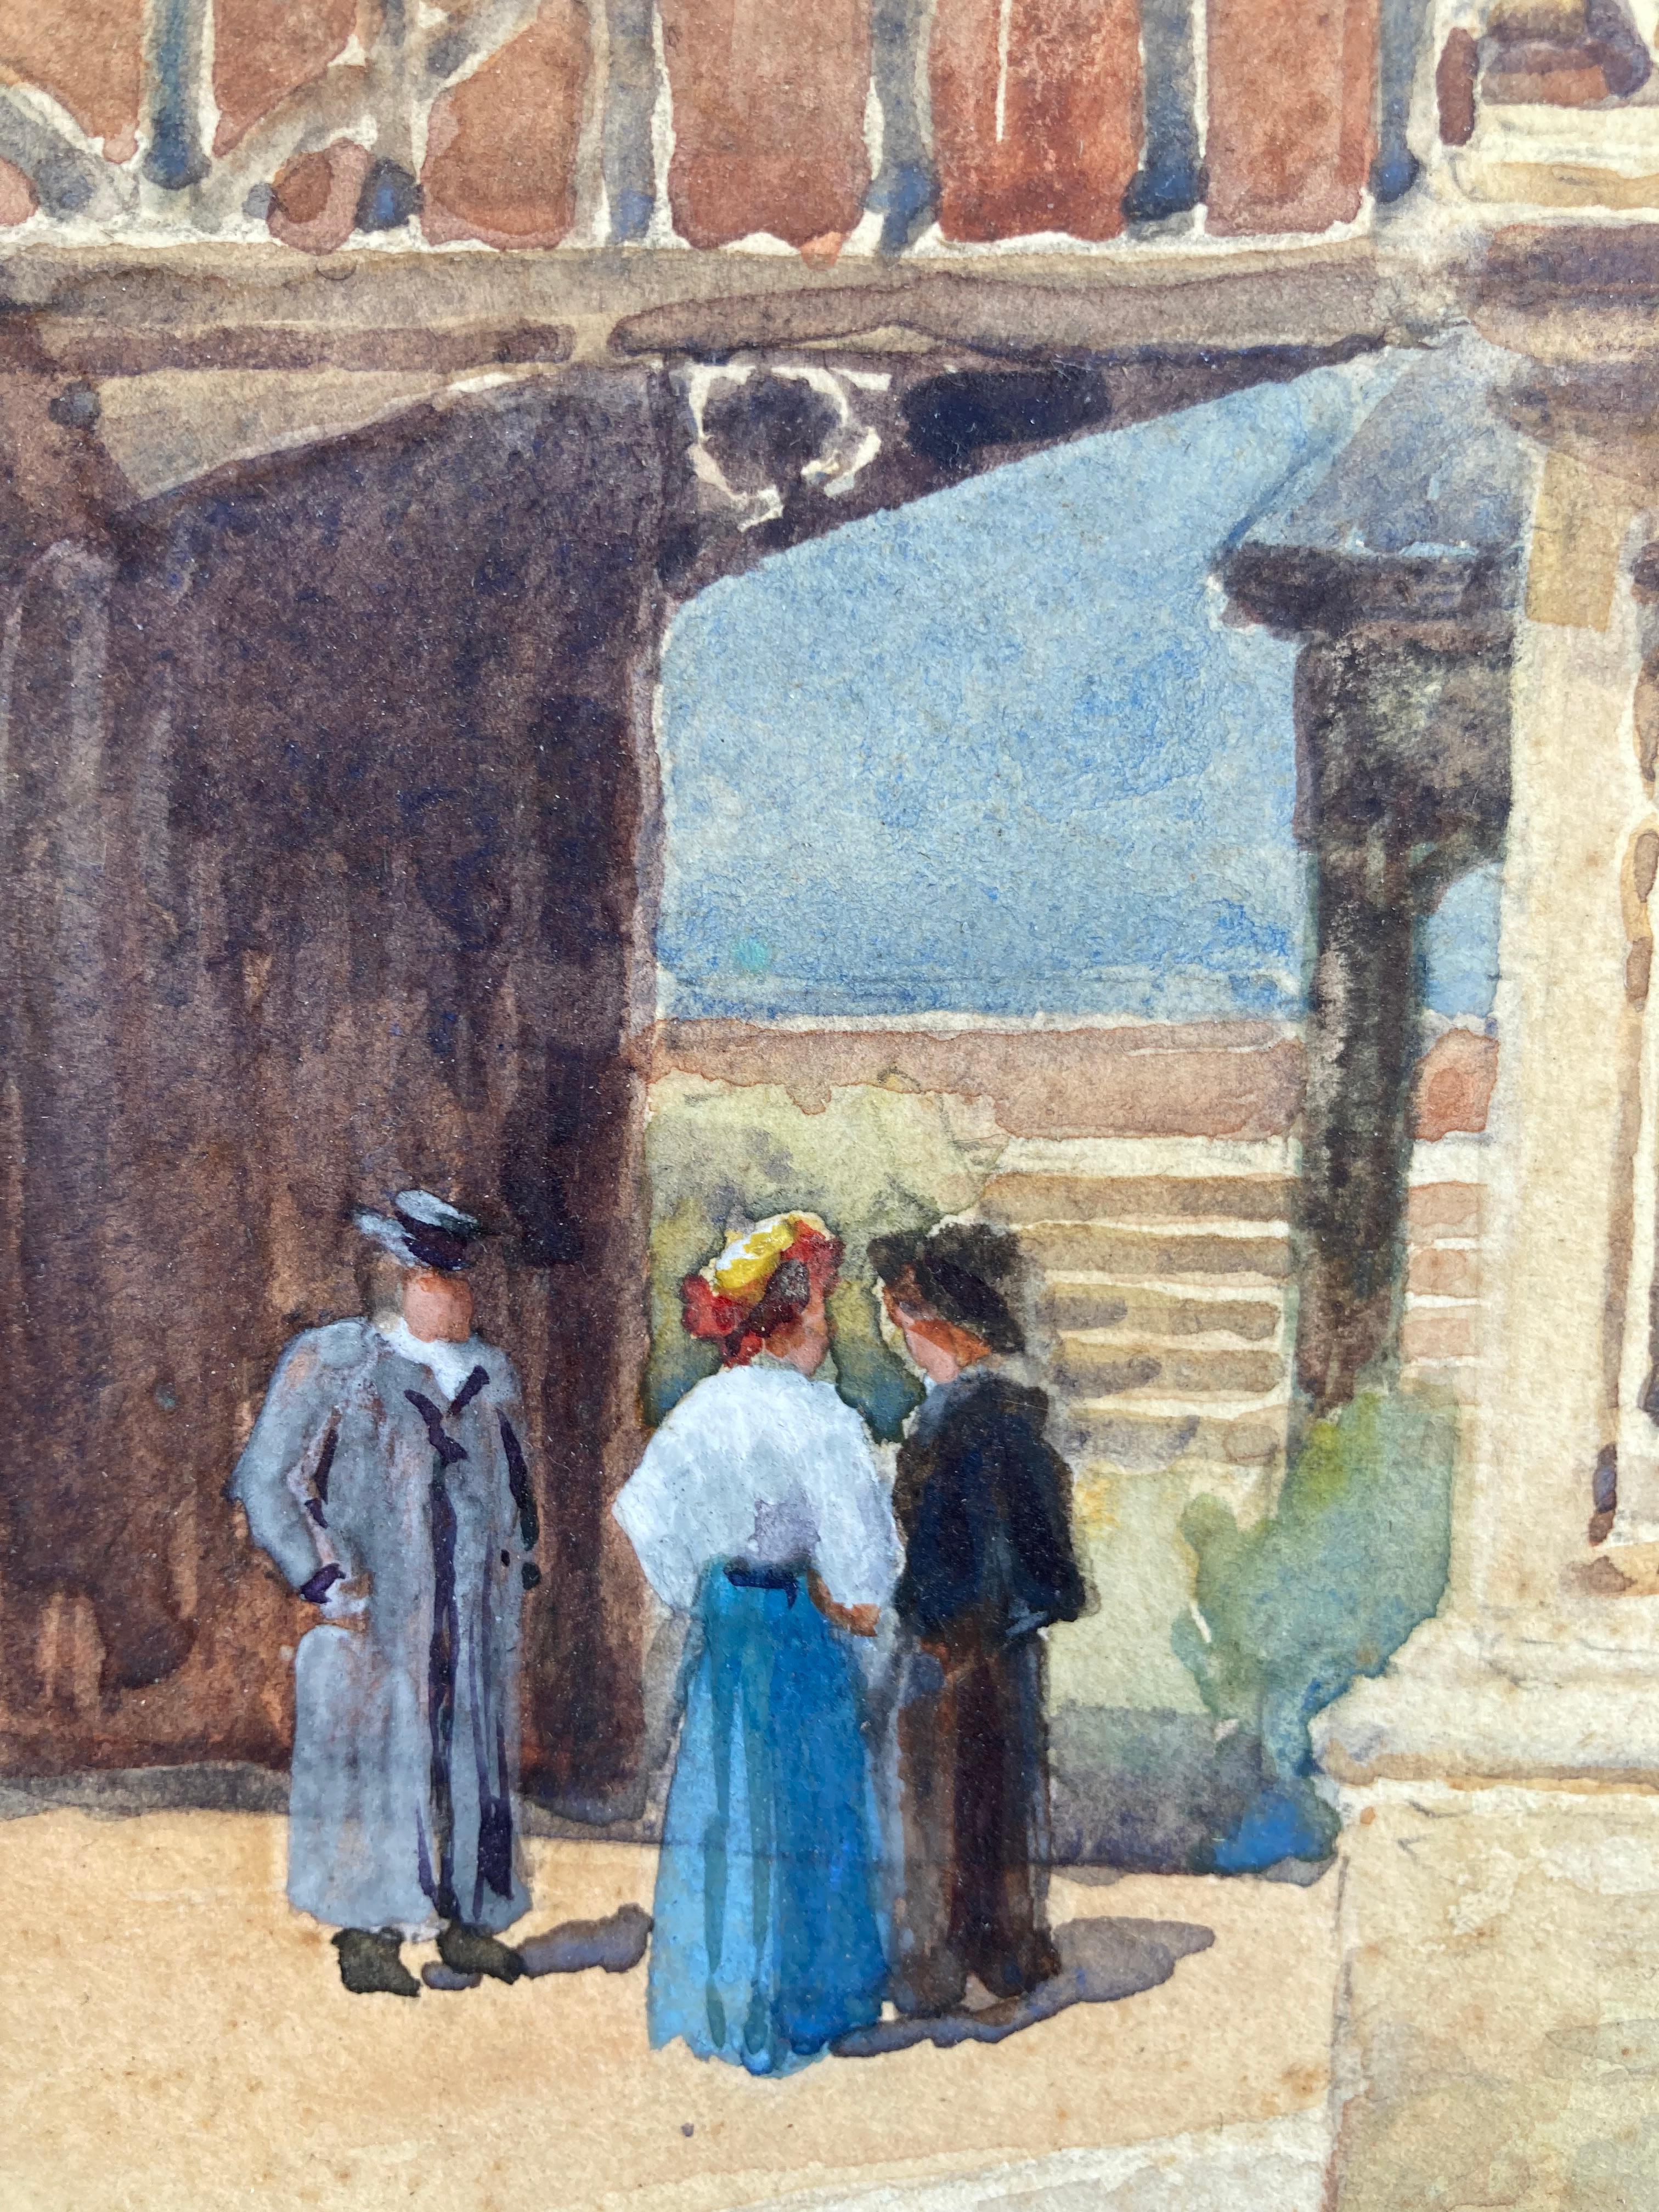 A lovely watercolor of the Horseshoe Cloisters at Windsor Castle, with three Edwardian figures having a chat near the stairway. There's an inscription and the signature 